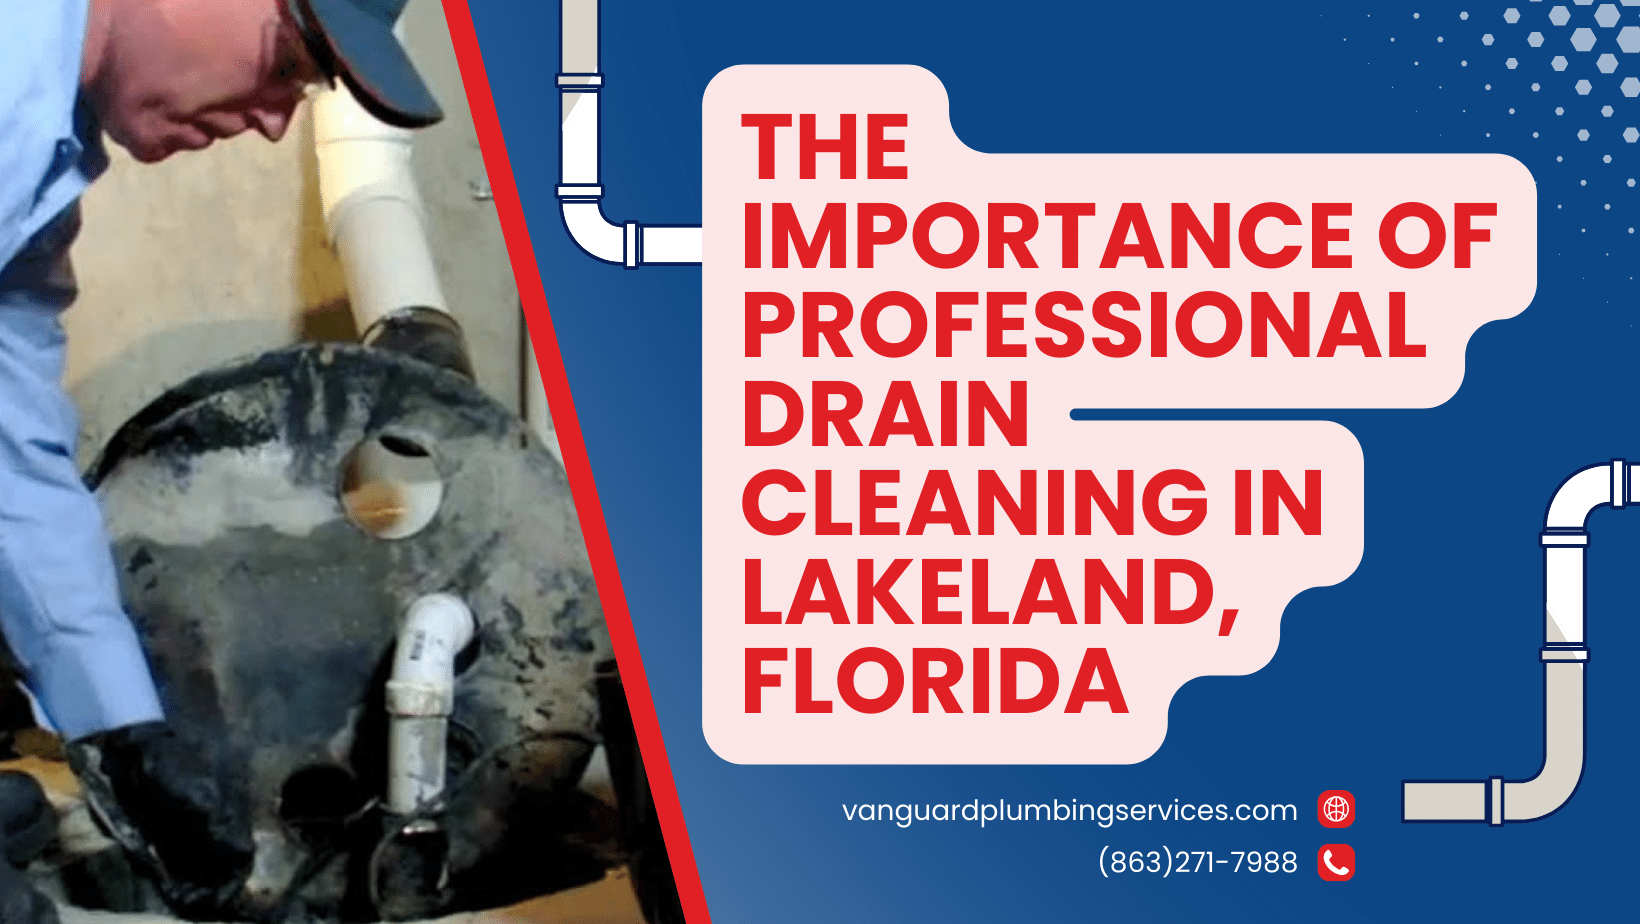 The Importance of Professional Drain Cleaning in Lakeland Florida